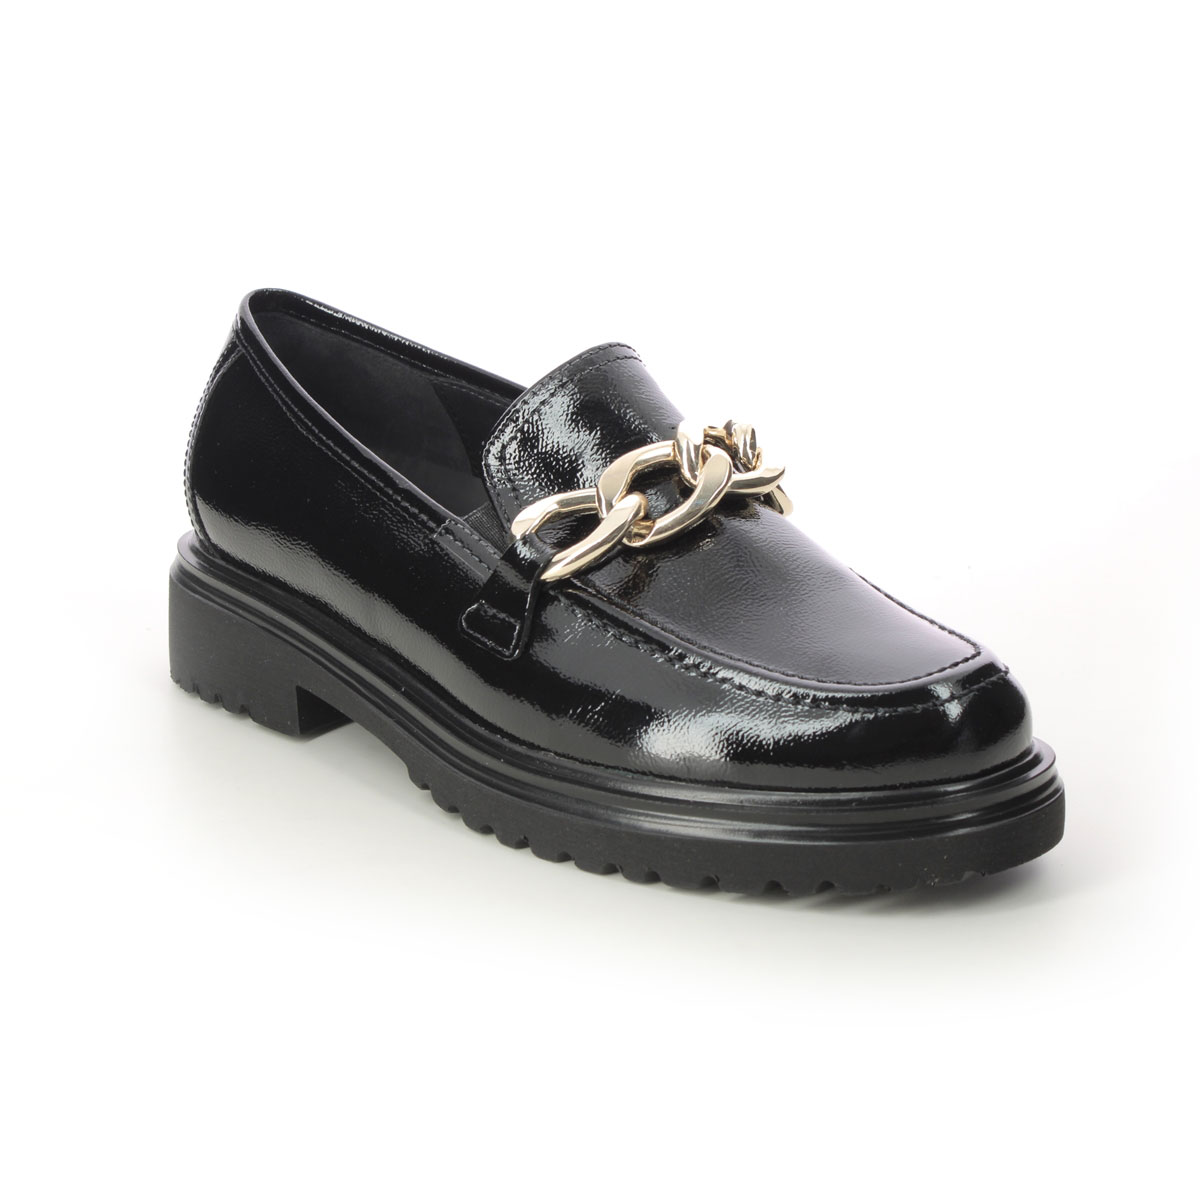 Gabor Florida H Black Patent Womens Loafers 92.554.97 In Size 6.5 In Plain Black Patent  Womens Comfort Slip On Shoes In Soft Black Patent Leather